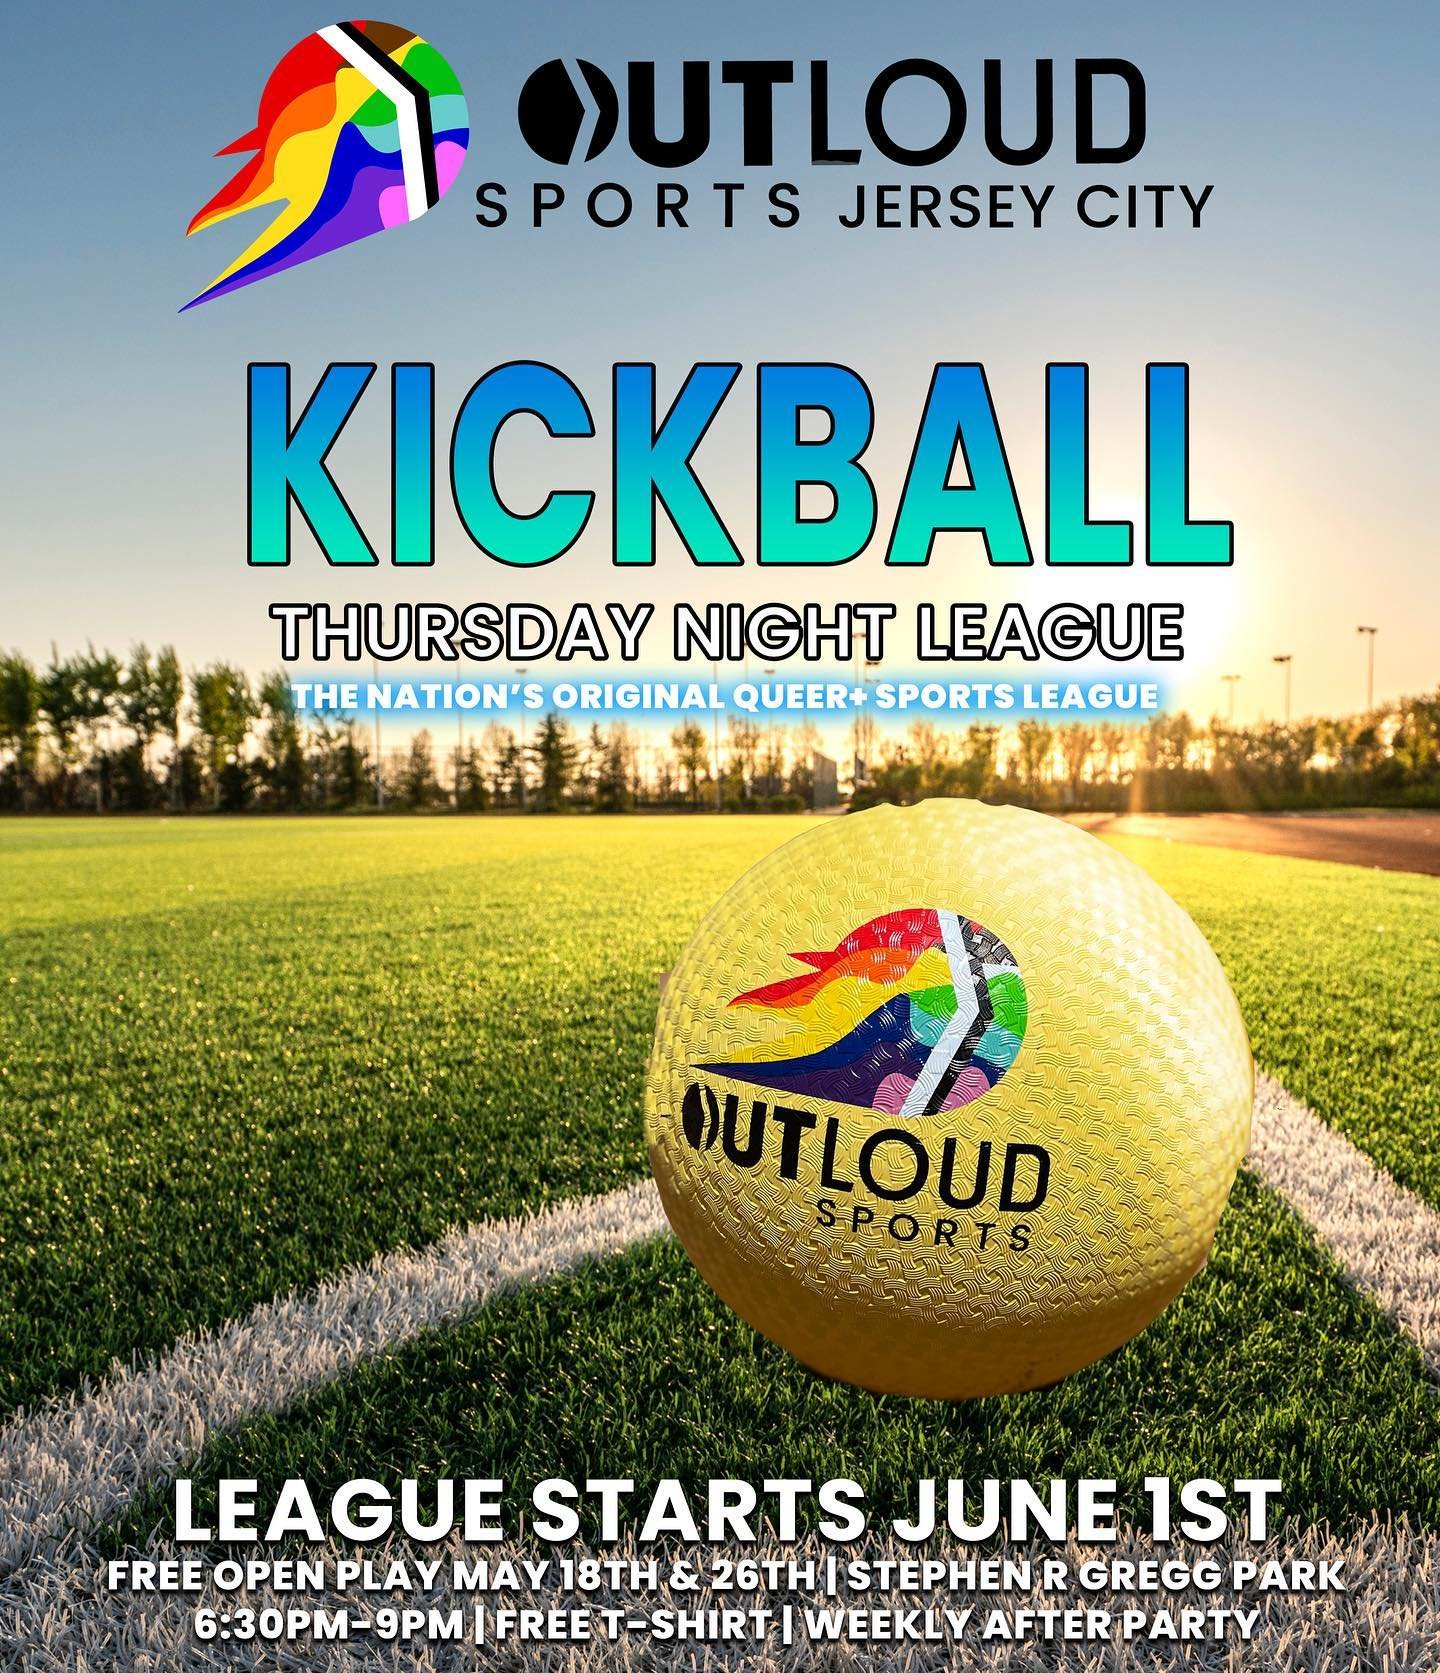 📣 Calling all kickball enthusiasts! 🌟

Get ready for an amazing open play session tomorrow at Stephen T Gregg park, Field D4! And guess what? It's FREE! ⚾️🎉

Join us for a thrilling evening of kickball fun from 6:30 -8:30. It's the perfect opportu